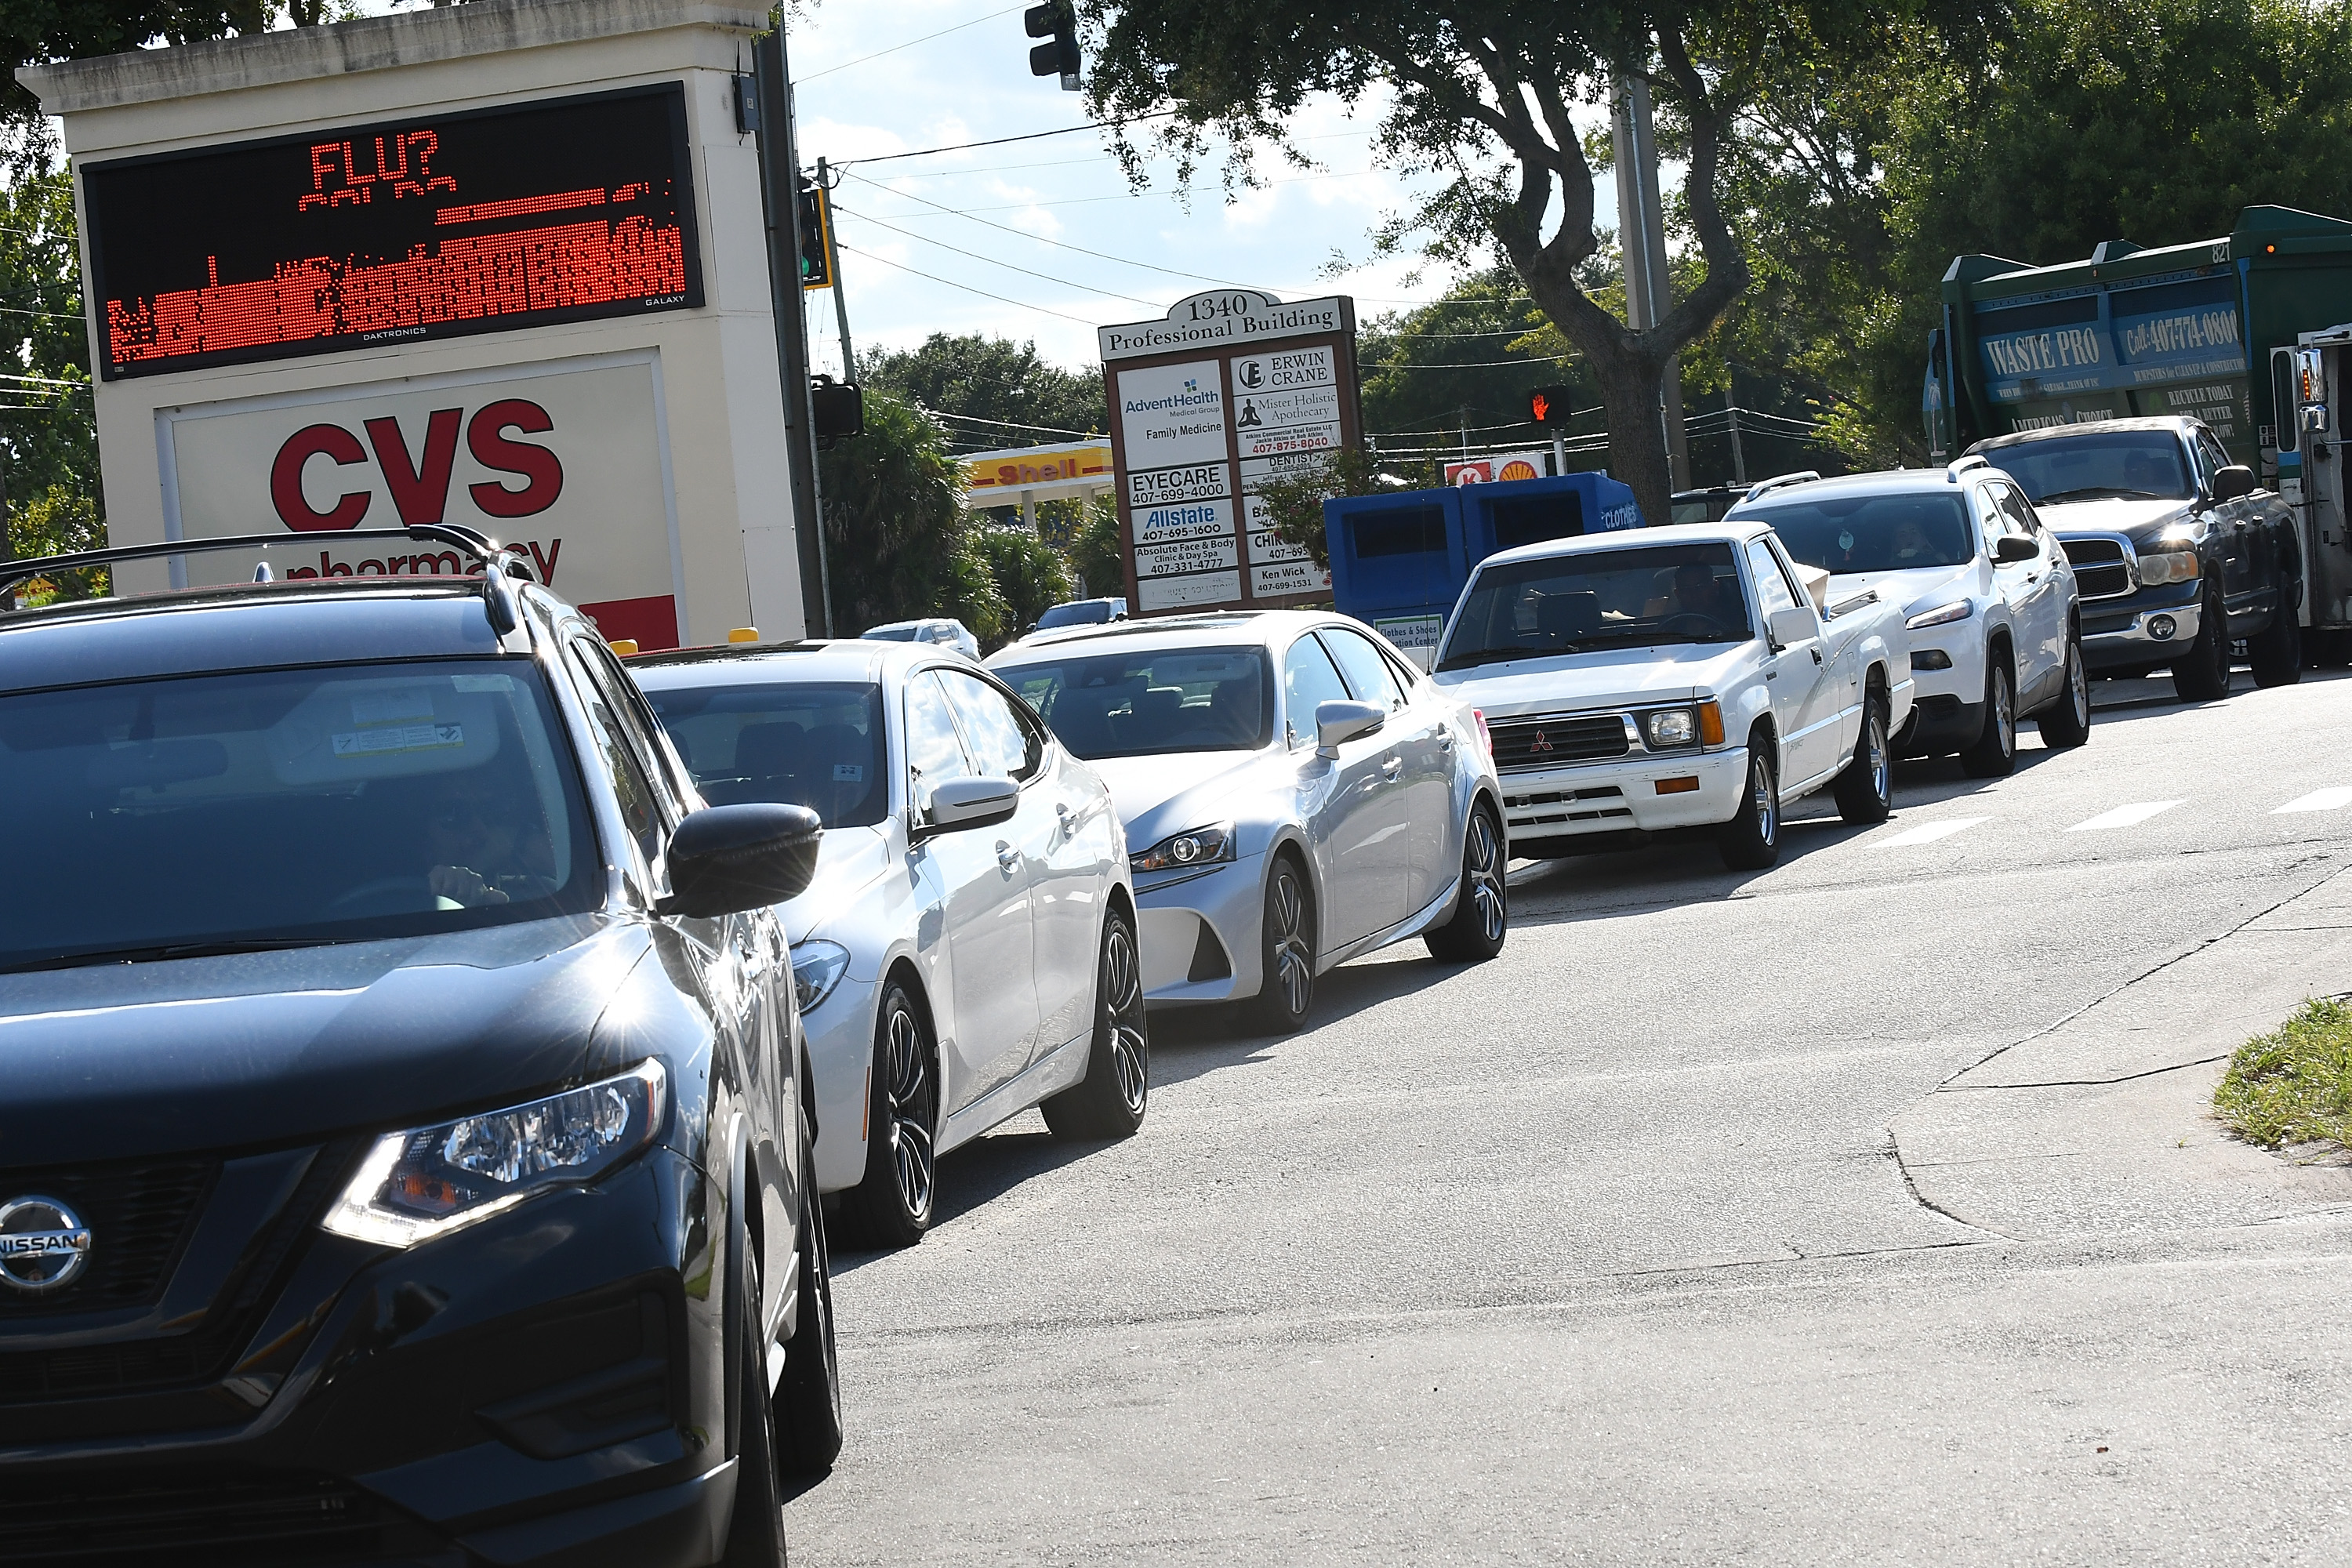 Residents wait in line to get gas in preparation for Hurricane Dorian on August 29, 2019 in Winter Springs, Florida. (Gerardo Mora/Getty Images)